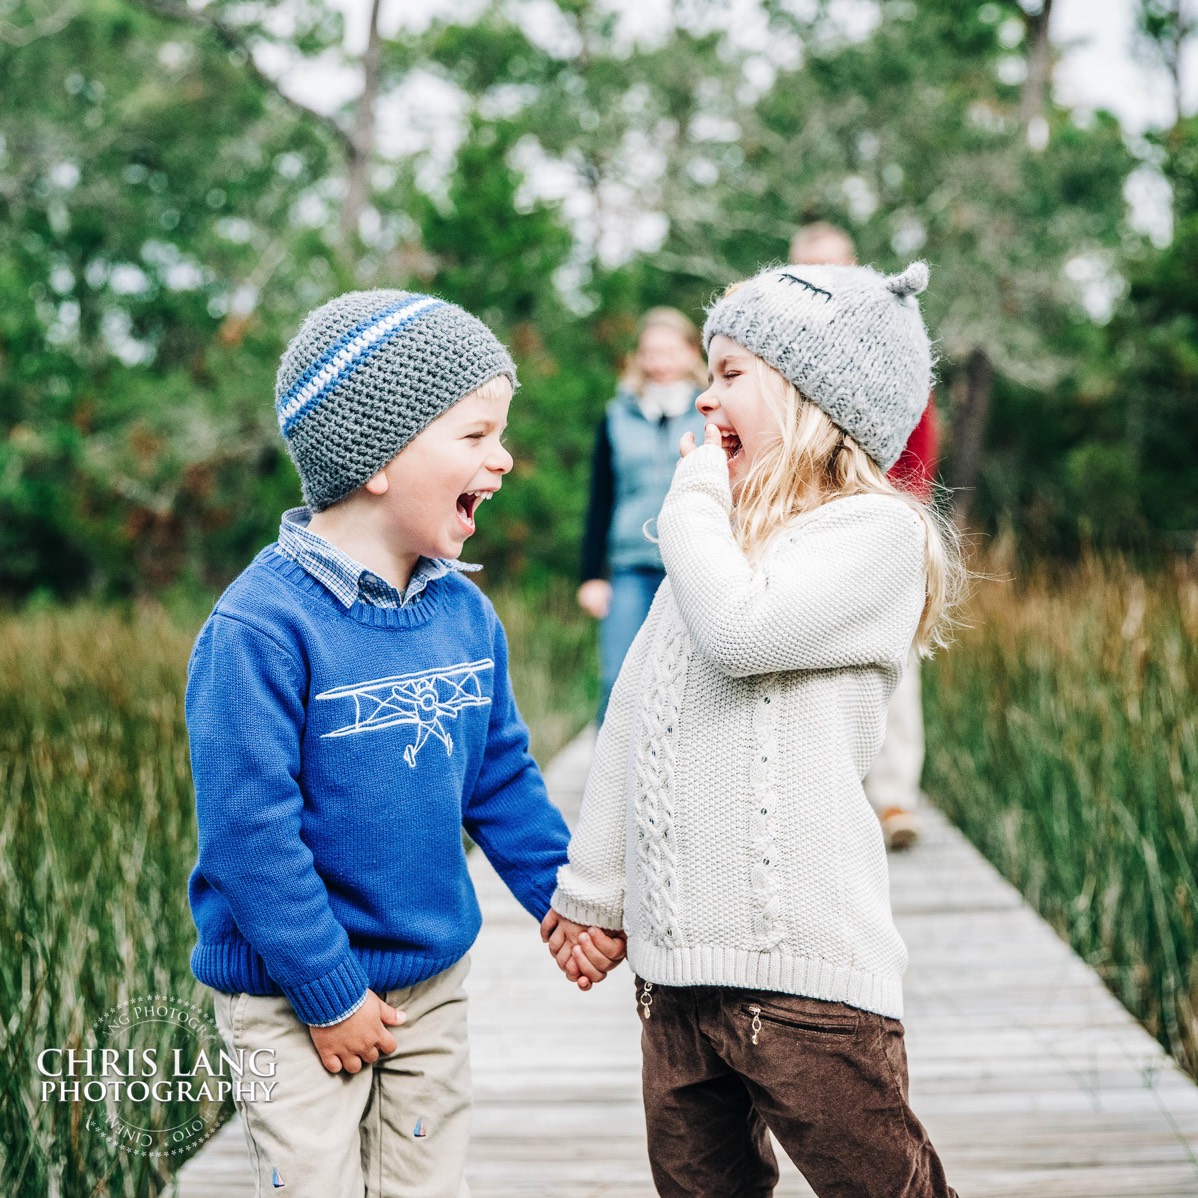 young broither and sister having fun and laughing  - candid portraits - Places for family vacation - Bald Head Island Photographers - BHI Photography - Kids Portraits -  Pictures on Bald Head Island - BHI Photo Services - Chris Lang Photography 